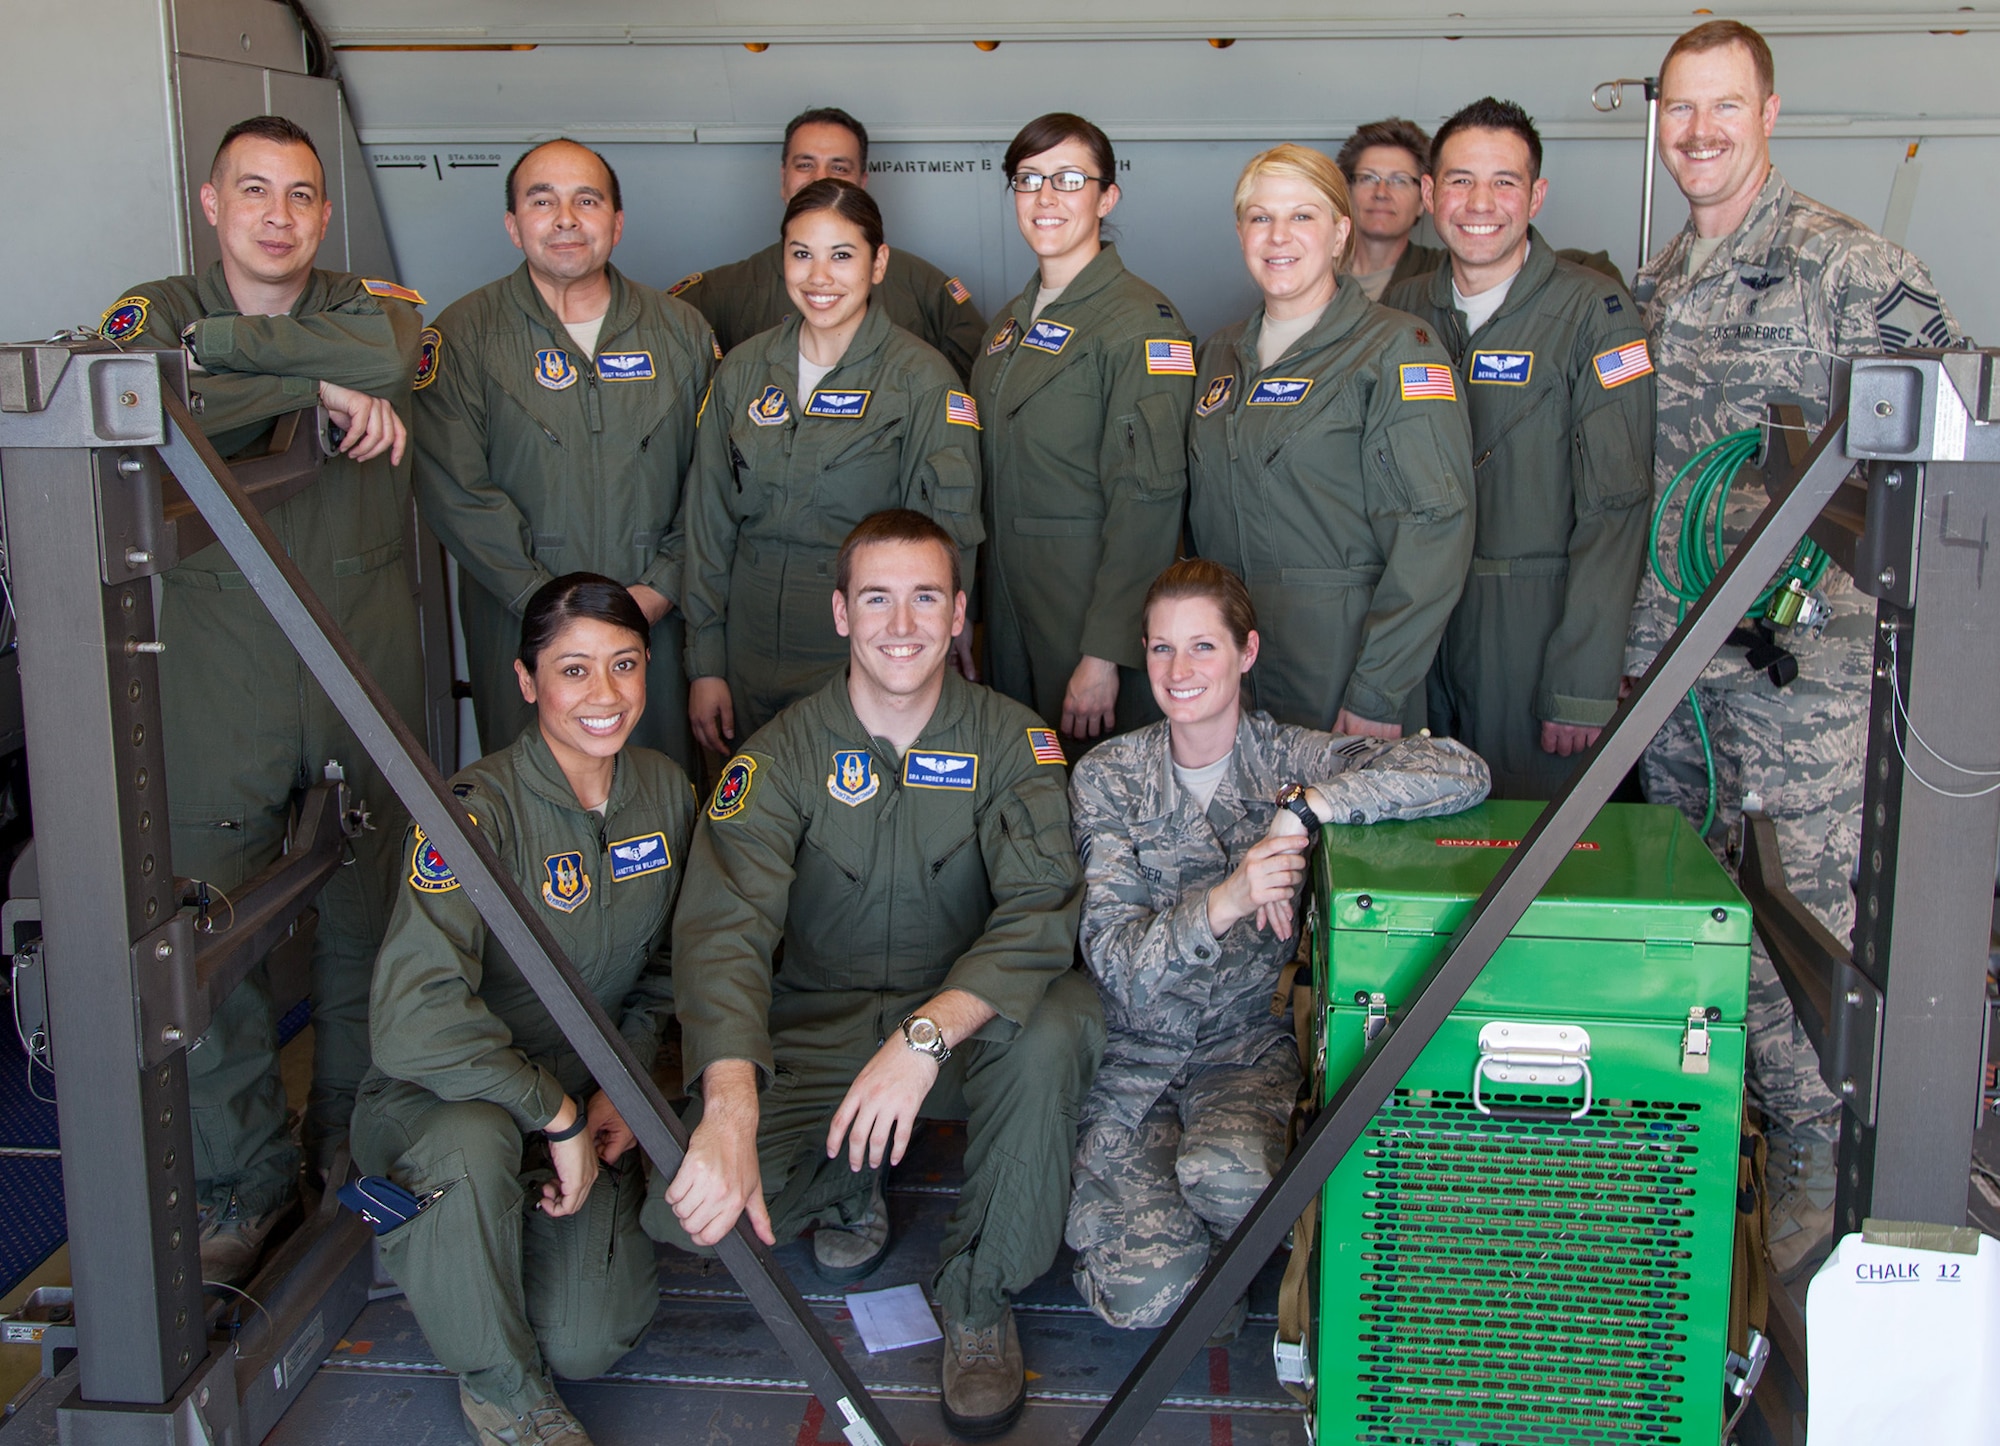 TRAVIS AIR FORCE BASE, Calif. -- Members of the 349th Aeromedical Evacuation Squadron pose for a group photo on board a KC-10A Extender at Travis Air Force Base, Calif., Feb. 23, 2014. Unlike the C-17 Globemaster III, the KC-10 was not designed with aeromedical evaluation in mind, but can be configured for the mission when needed. During the Unit Training Assembly of Feb. 22-23, squadrons from across the 349th Air Mobility Wing conducted interrelated exercise scenarios, providing Reservists opportunities to achieve core skill proficiency training. (U.S. Air Force photo / Lt. Col. Robert Couse-Baker)